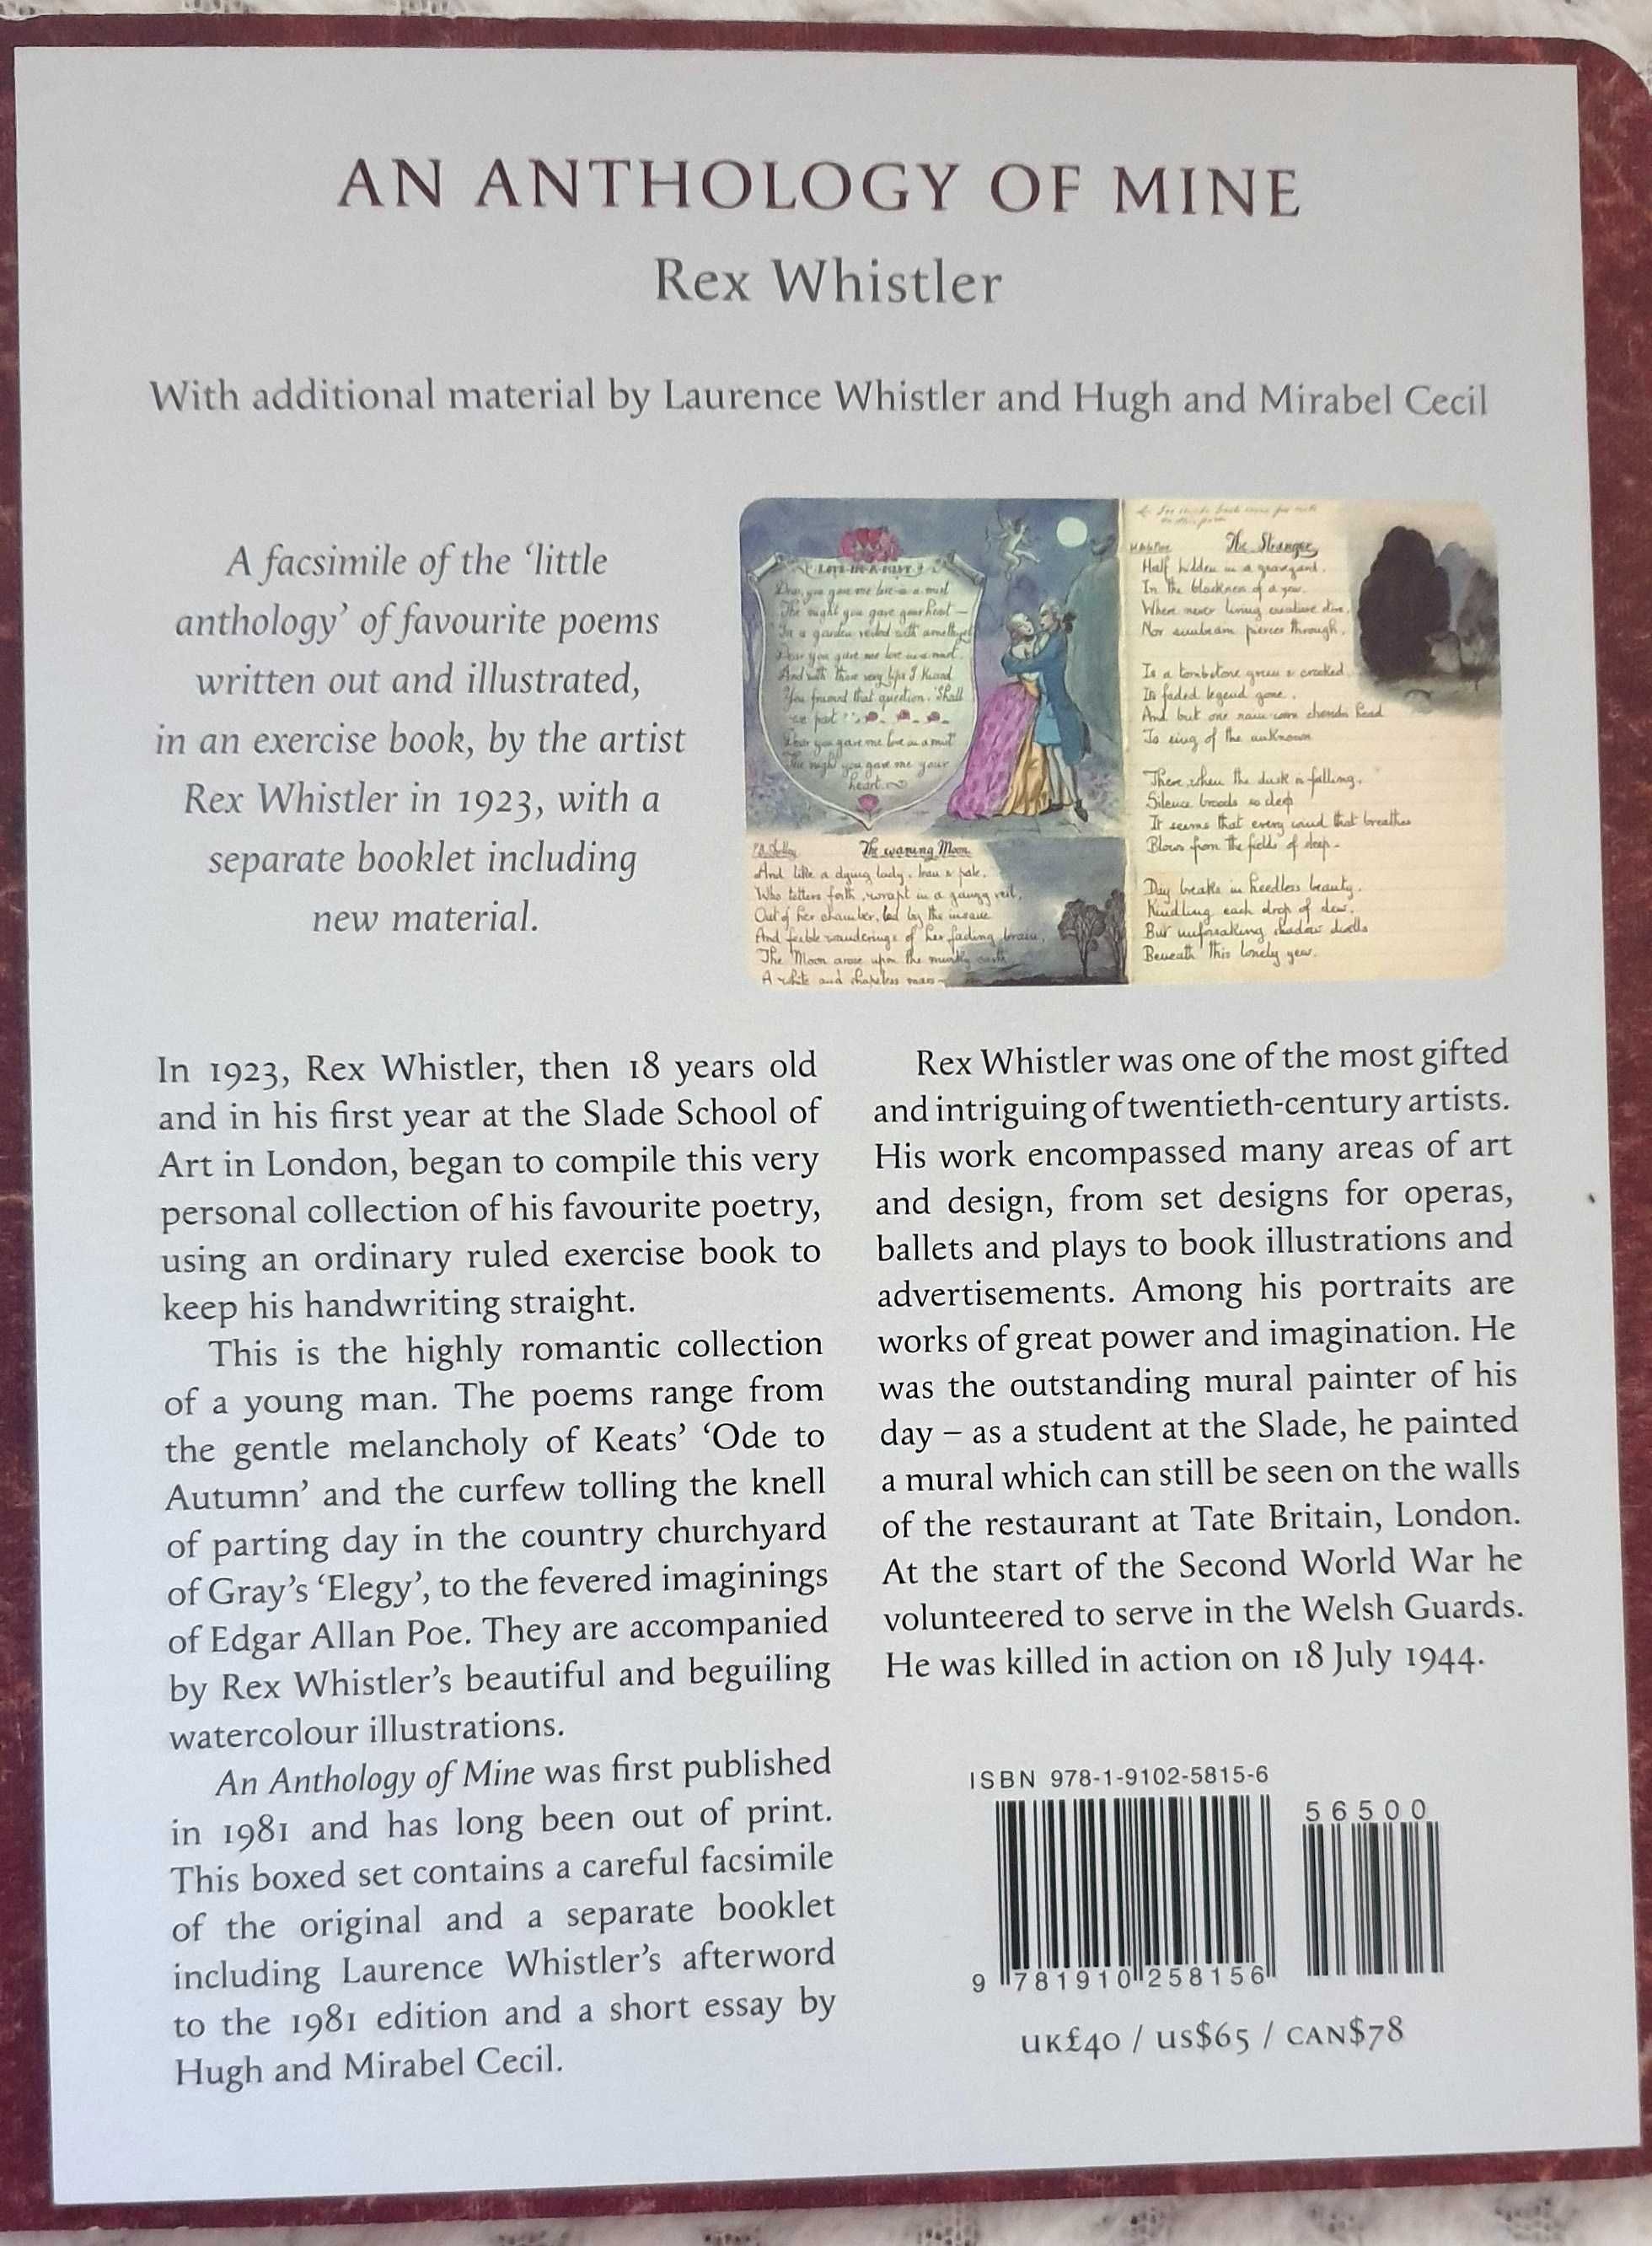 Poeme ilustrate - An Anthology of Mine - Rex Whistler